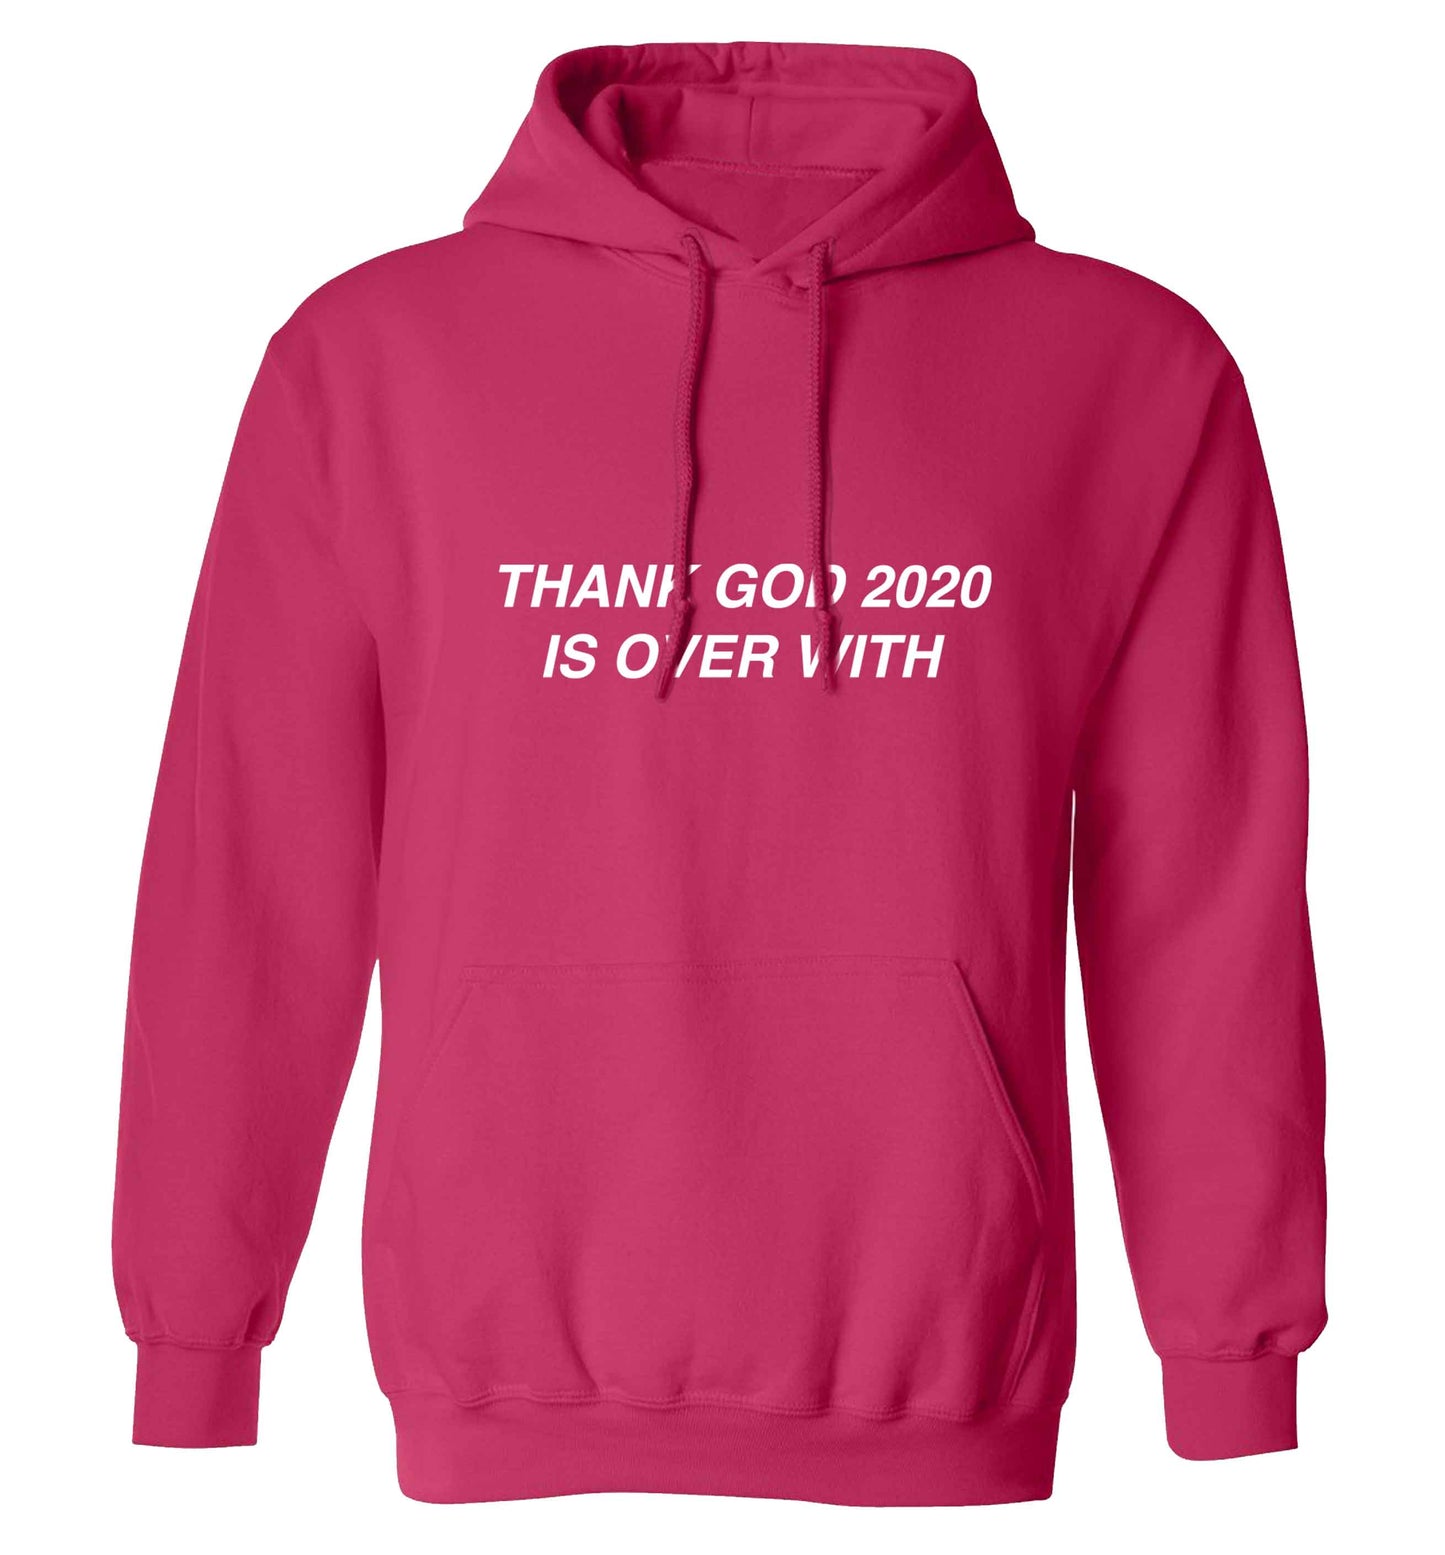 Thank god 2020 is over with adults unisex pink hoodie 2XL